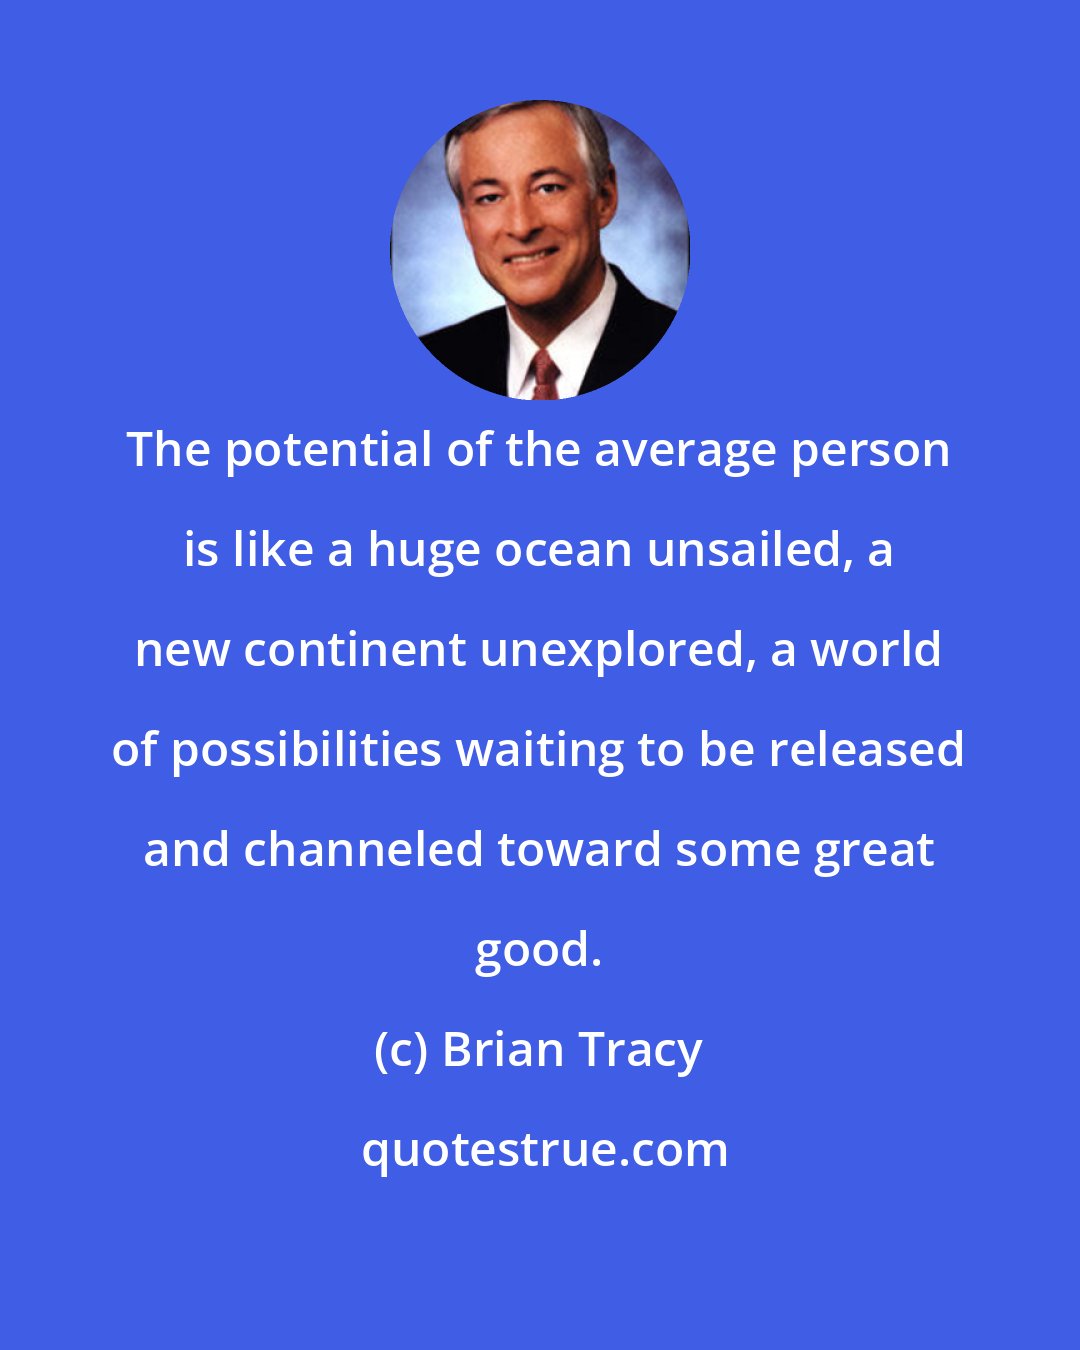 Brian Tracy: The potential of the average person is like a huge ocean unsailed, a new continent unexplored, a world of possibilities waiting to be released and channeled toward some great good.